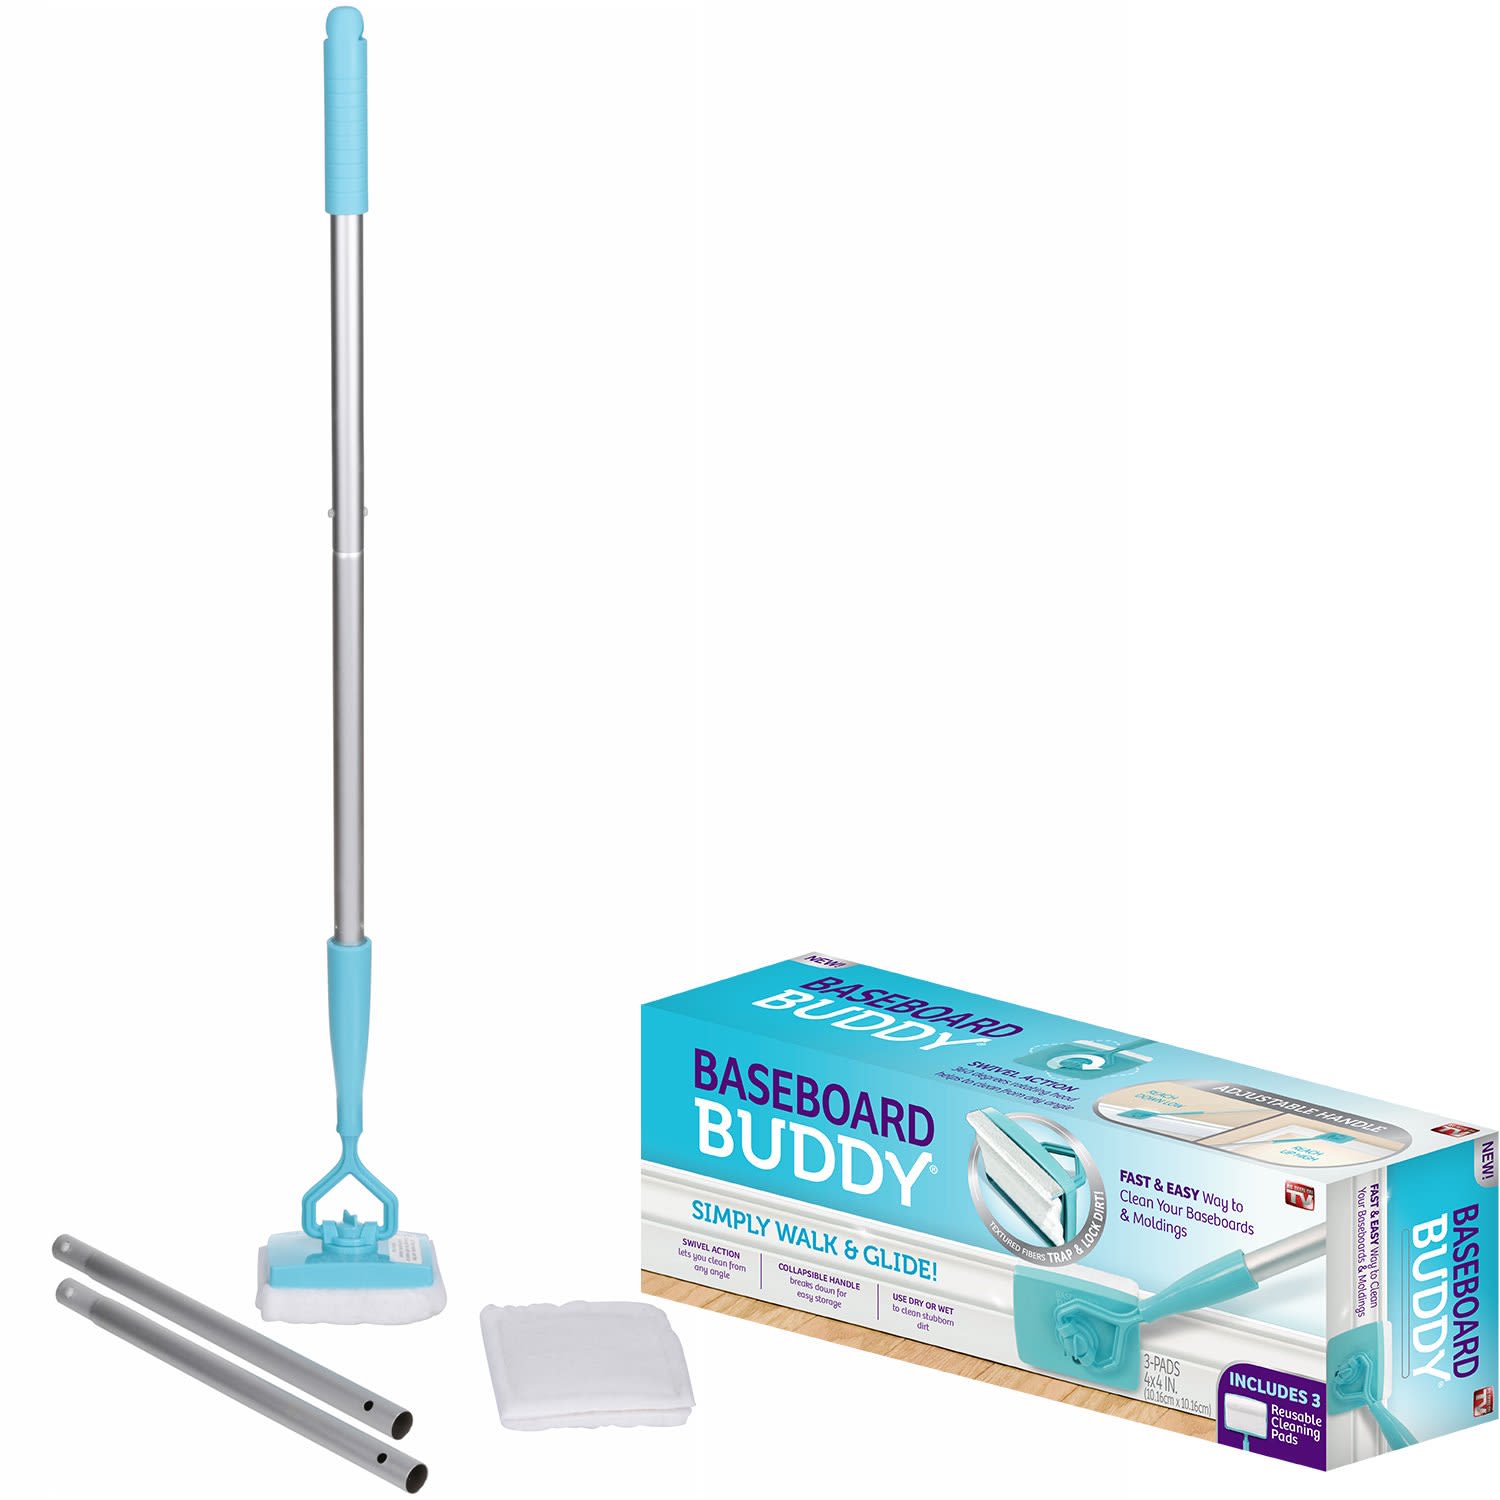 https://cdn.apartmenttherapy.info/image/upload/v1574090316/k/Edit/2019-11-Must-Have-Cleaning-Tools-Organizers/baseboard_buddy.jpg